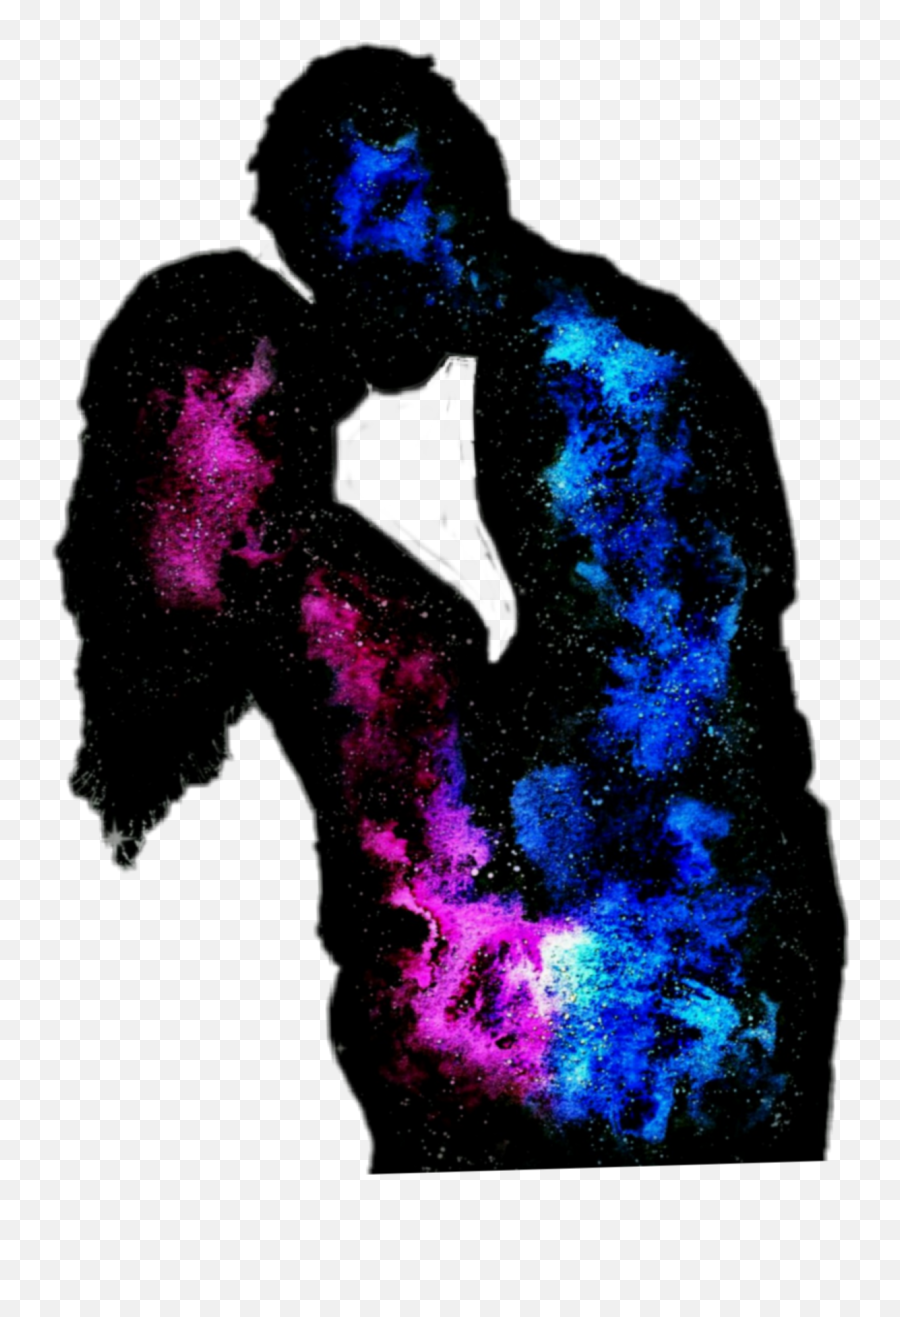 The Most Edited Spaceboy Picsart - Touch Her Soul You Before Touch Her Body Emoji,Guess The Emoji Something Kiss